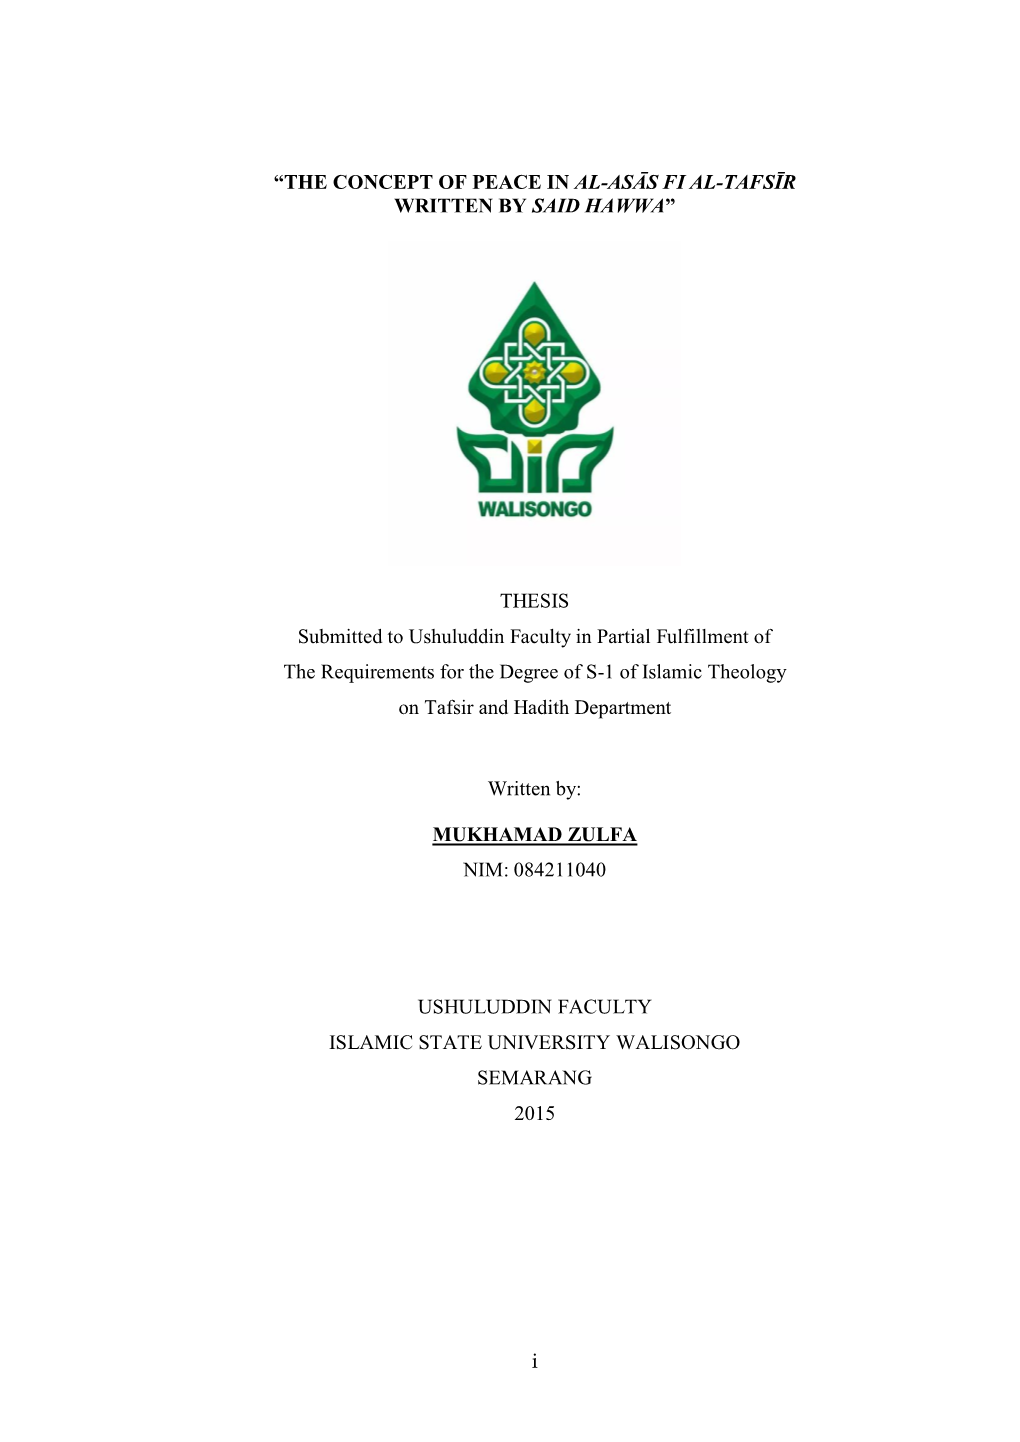 I “THE CONCEPT of PEACE in AL-ASĀS FI AL-TAFSĪR WRITTEN by SAID HAWWA” THESIS Submitted to Ushuluddin Faculty in Partial F